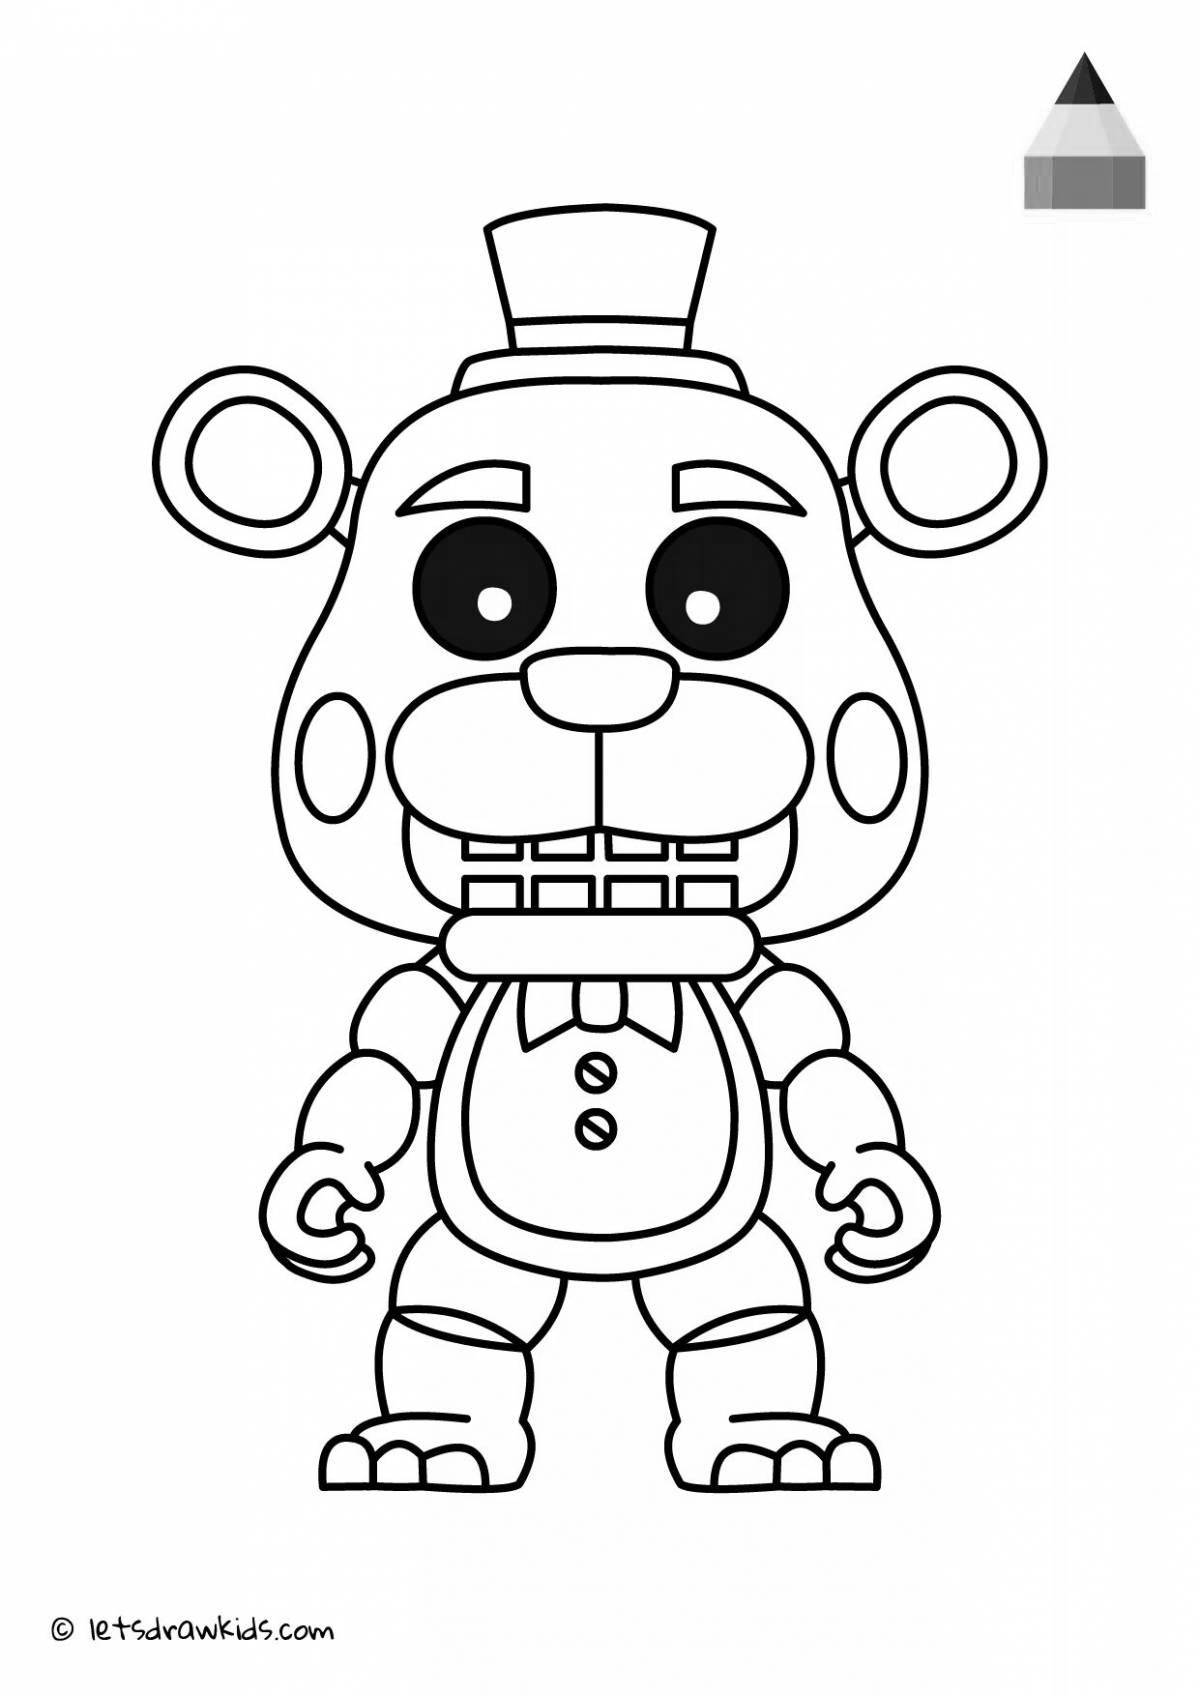 Coloring book playful freddy bear